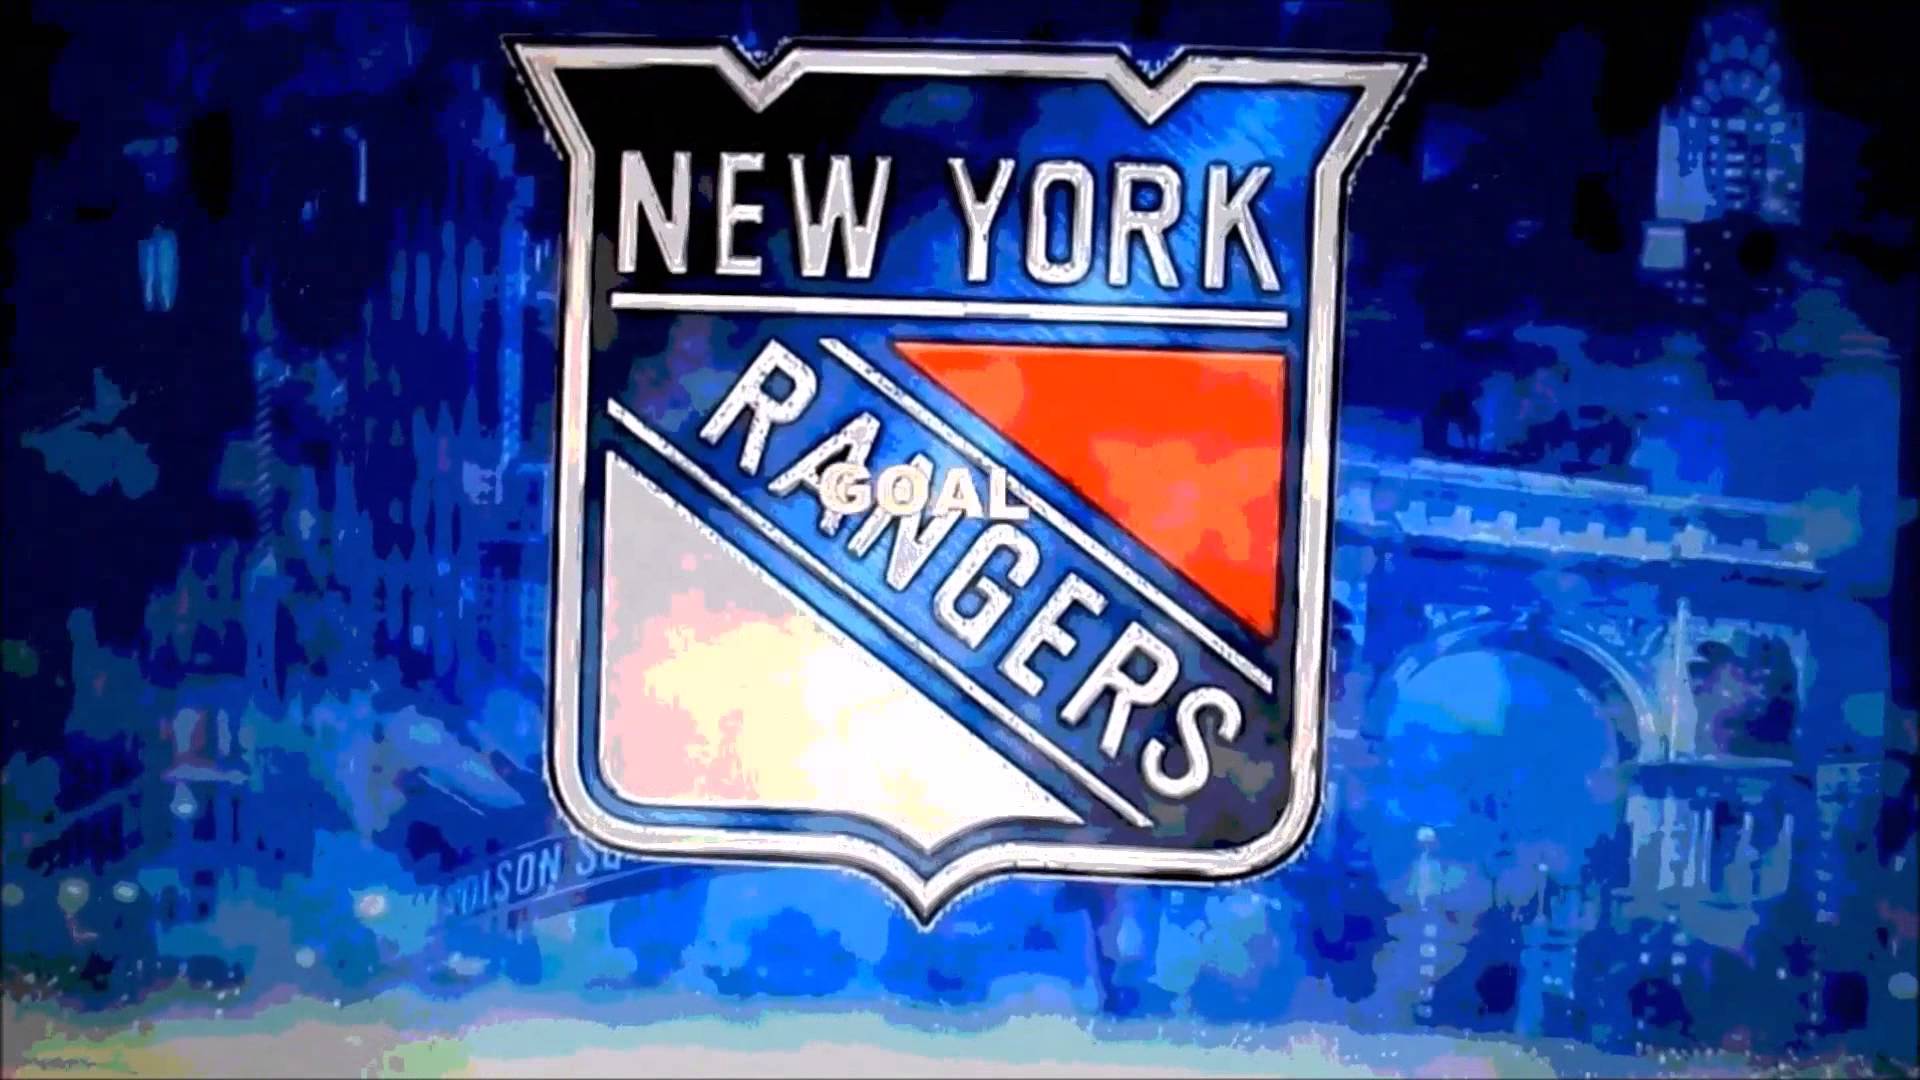 New York Rangers wallpapers for desktop, download free New York Rangers  pictures and backgrounds for PC